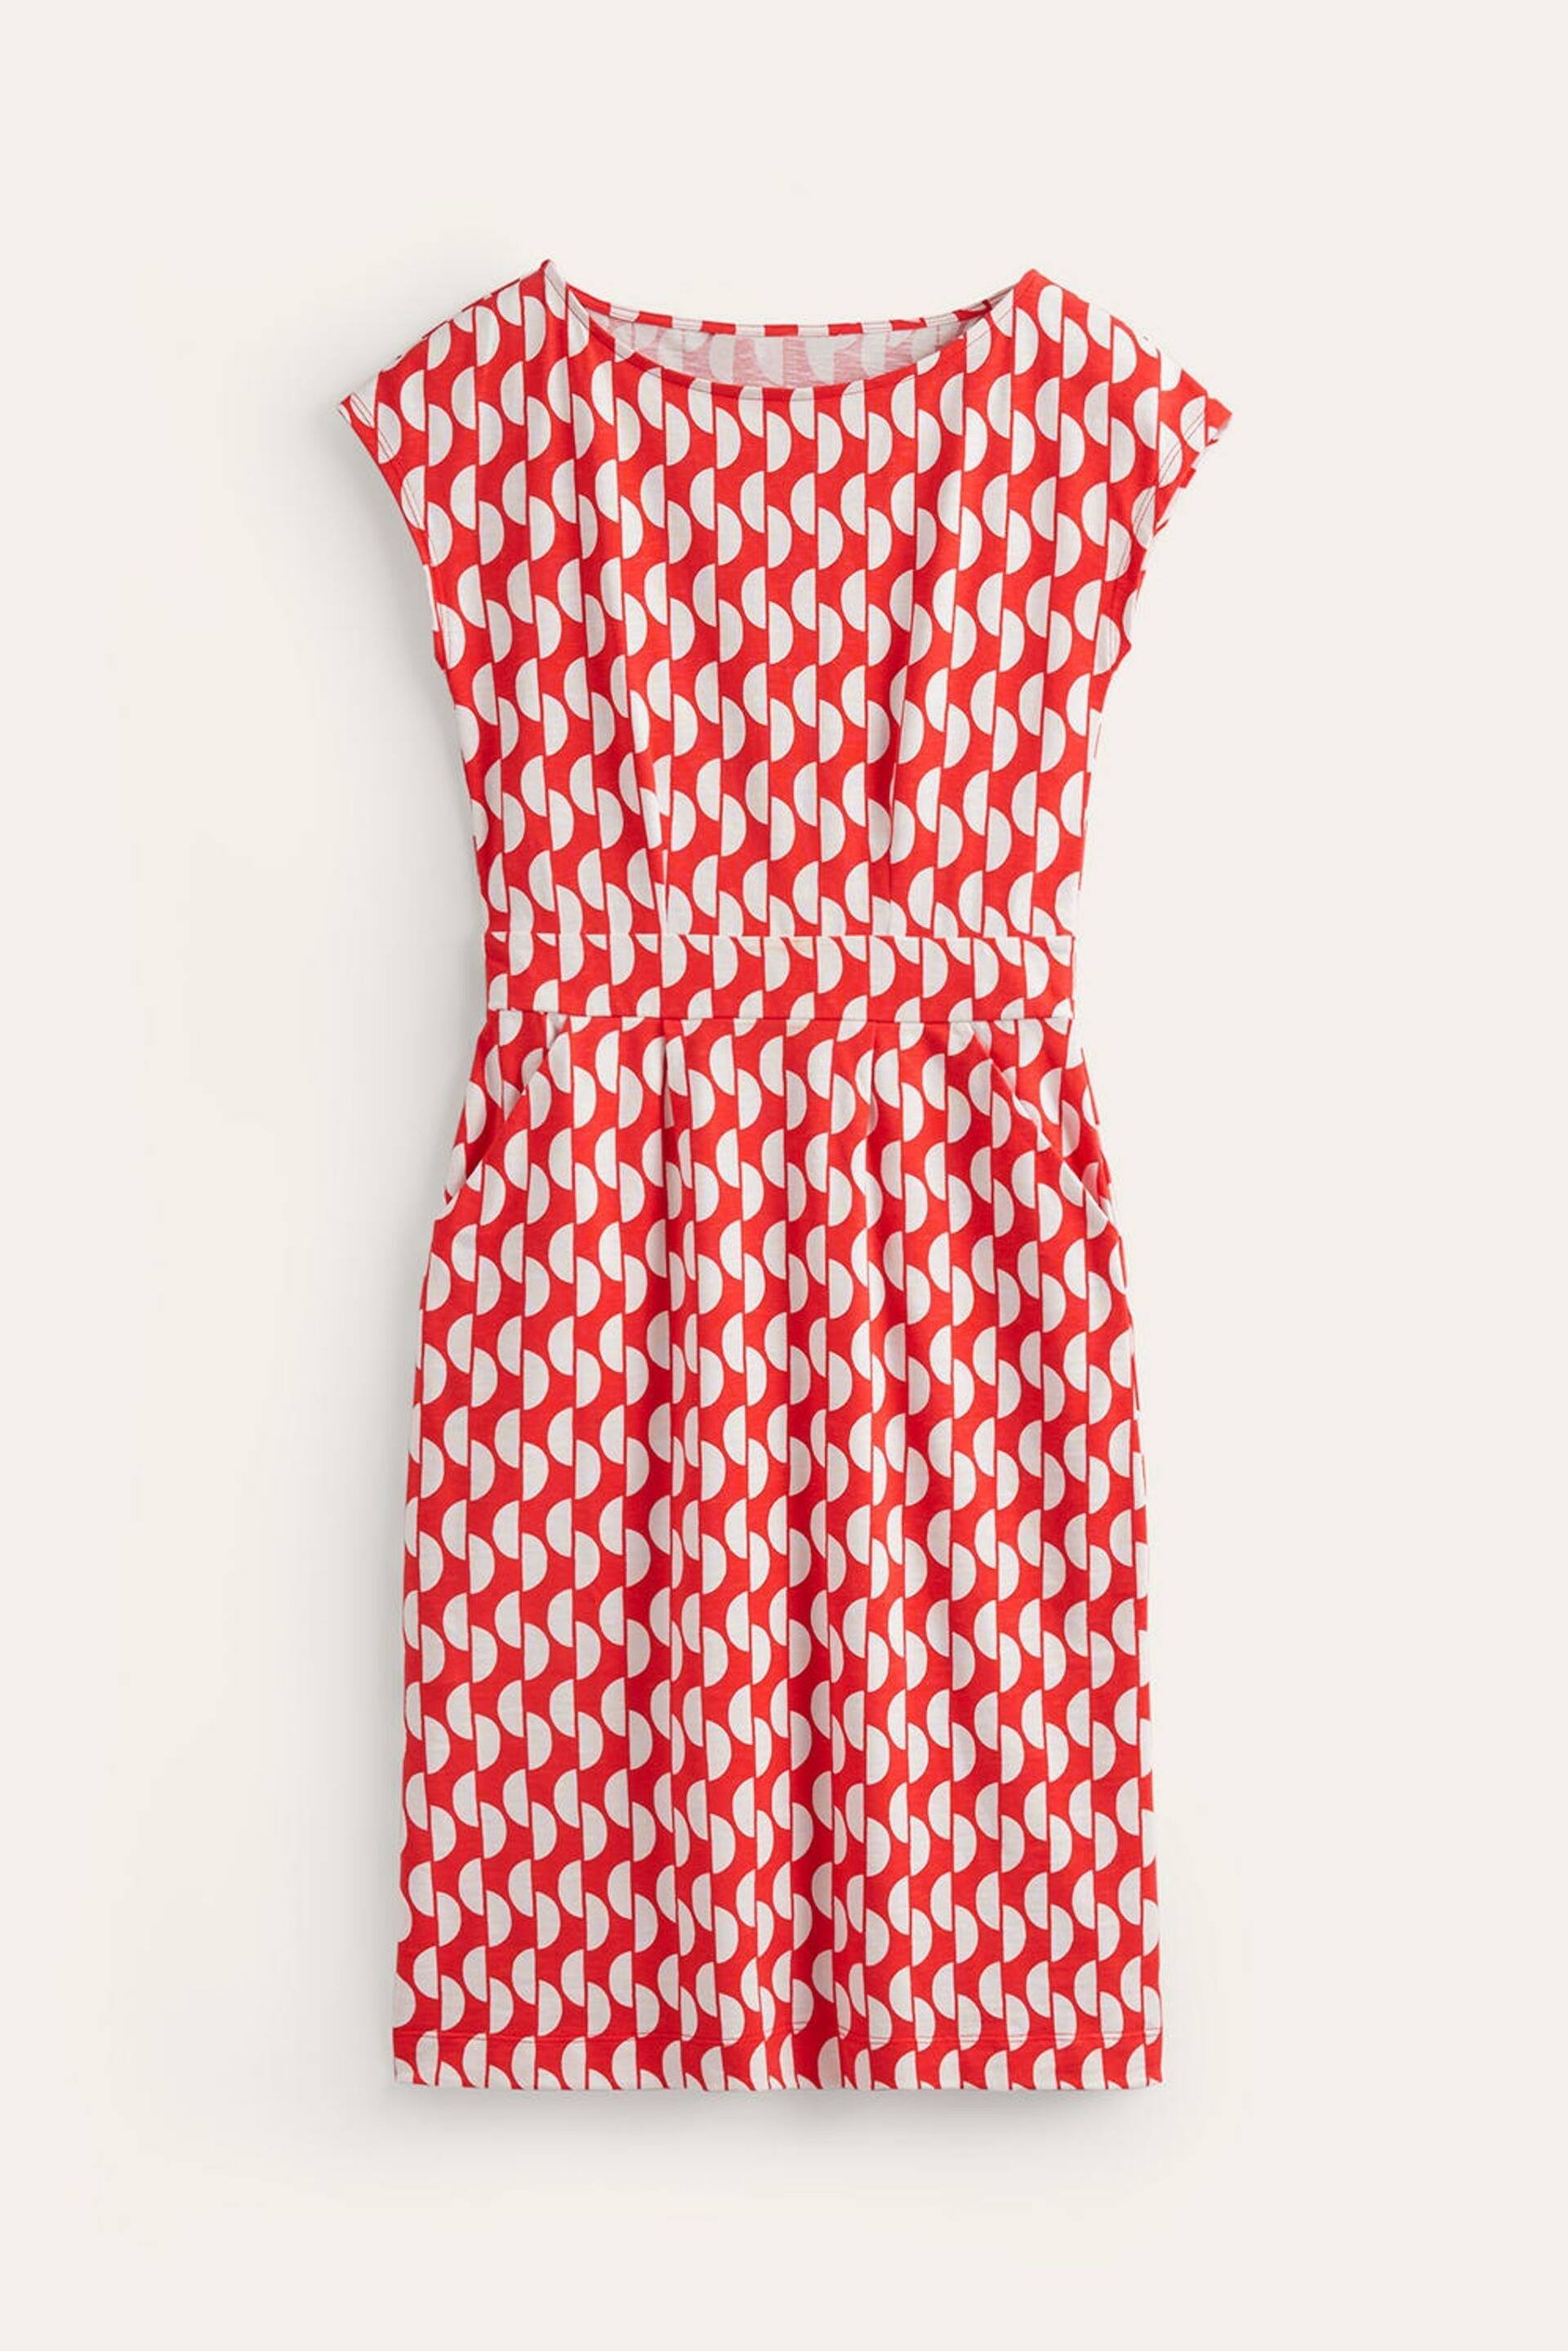 Boden Red Florrie Jersey Dress - Image 4 of 4